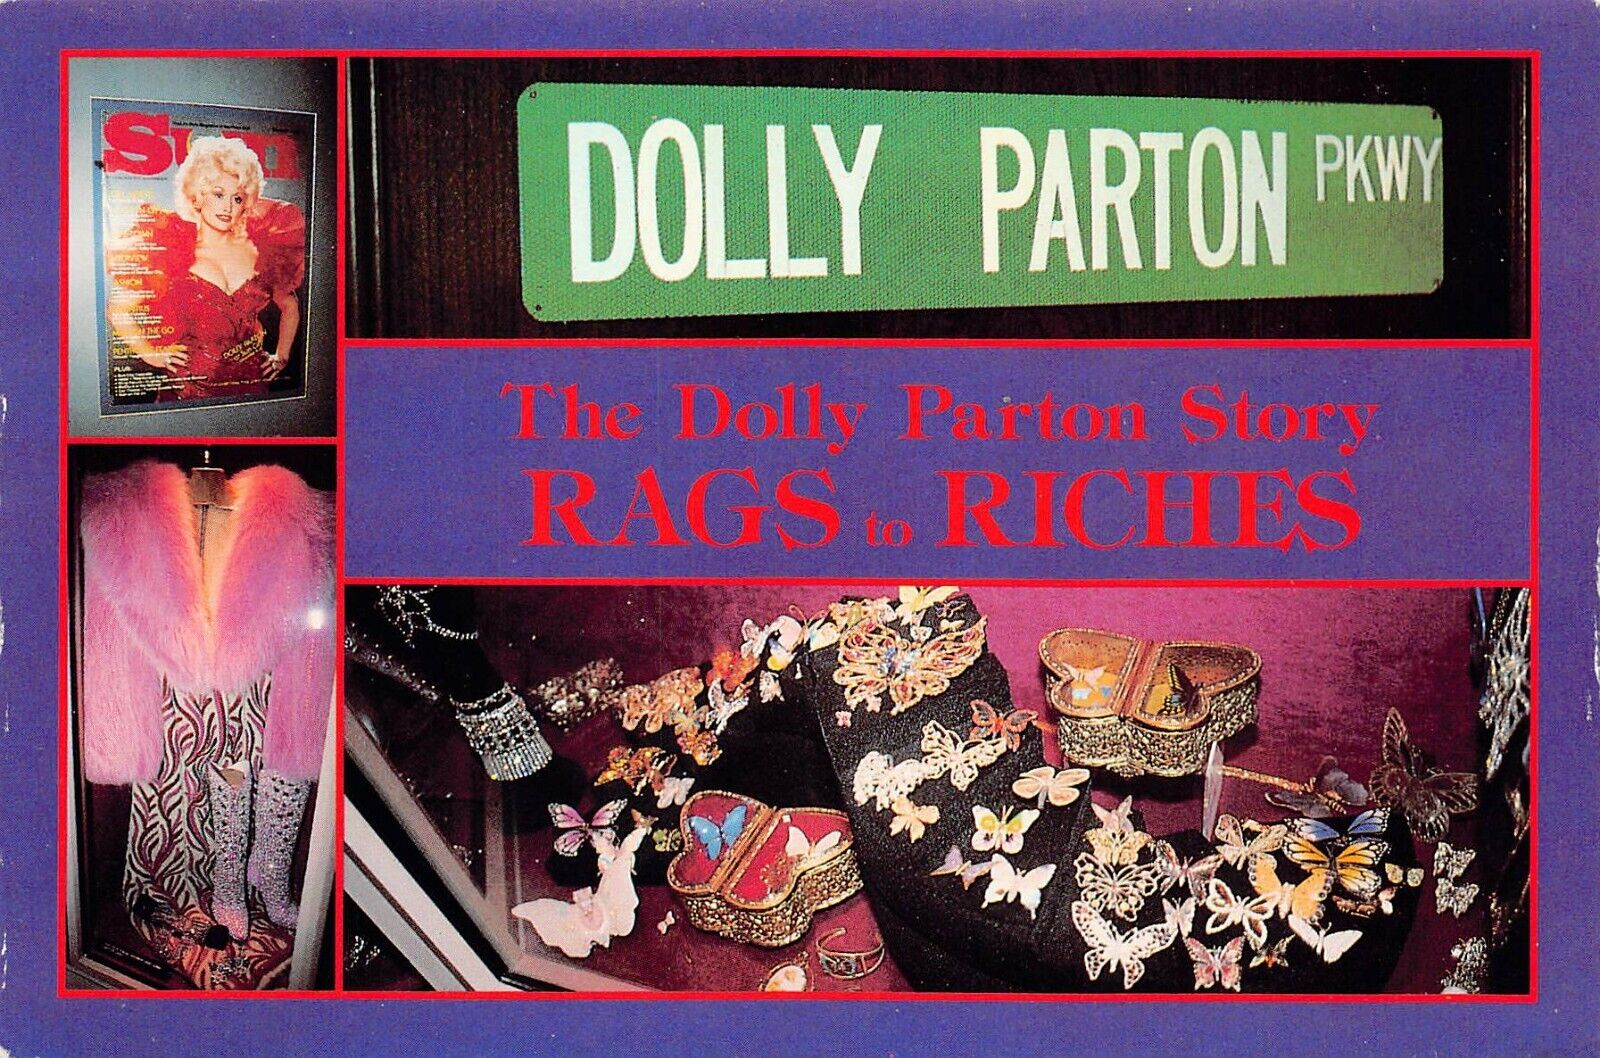 DOLLYWOOD Dolly Parton Museum Jewelry Boots Red Dress Fur 6x4 Vtg Postcard U9